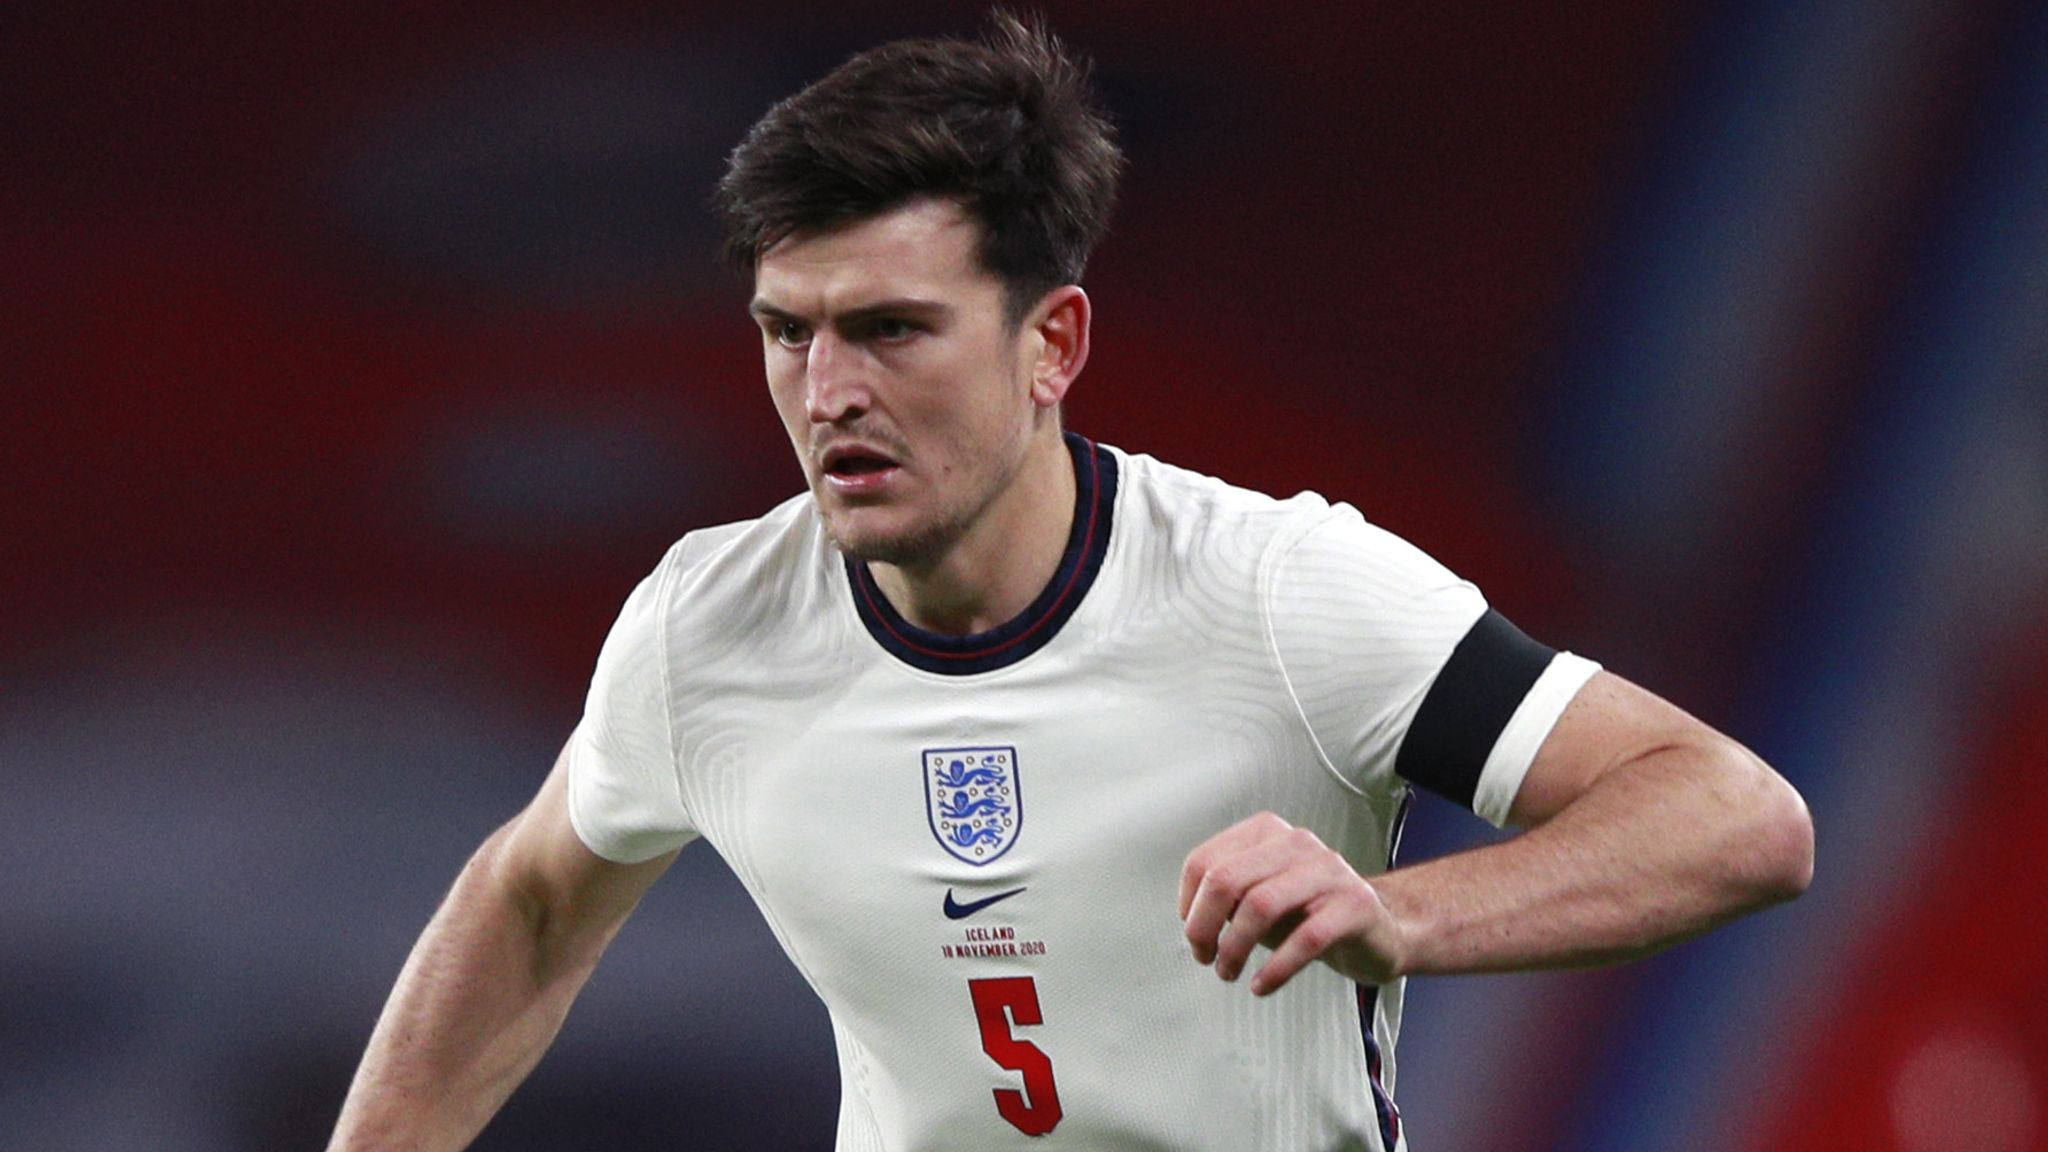 Southgate Blames Ten Hag For Maguire’s Poor Form